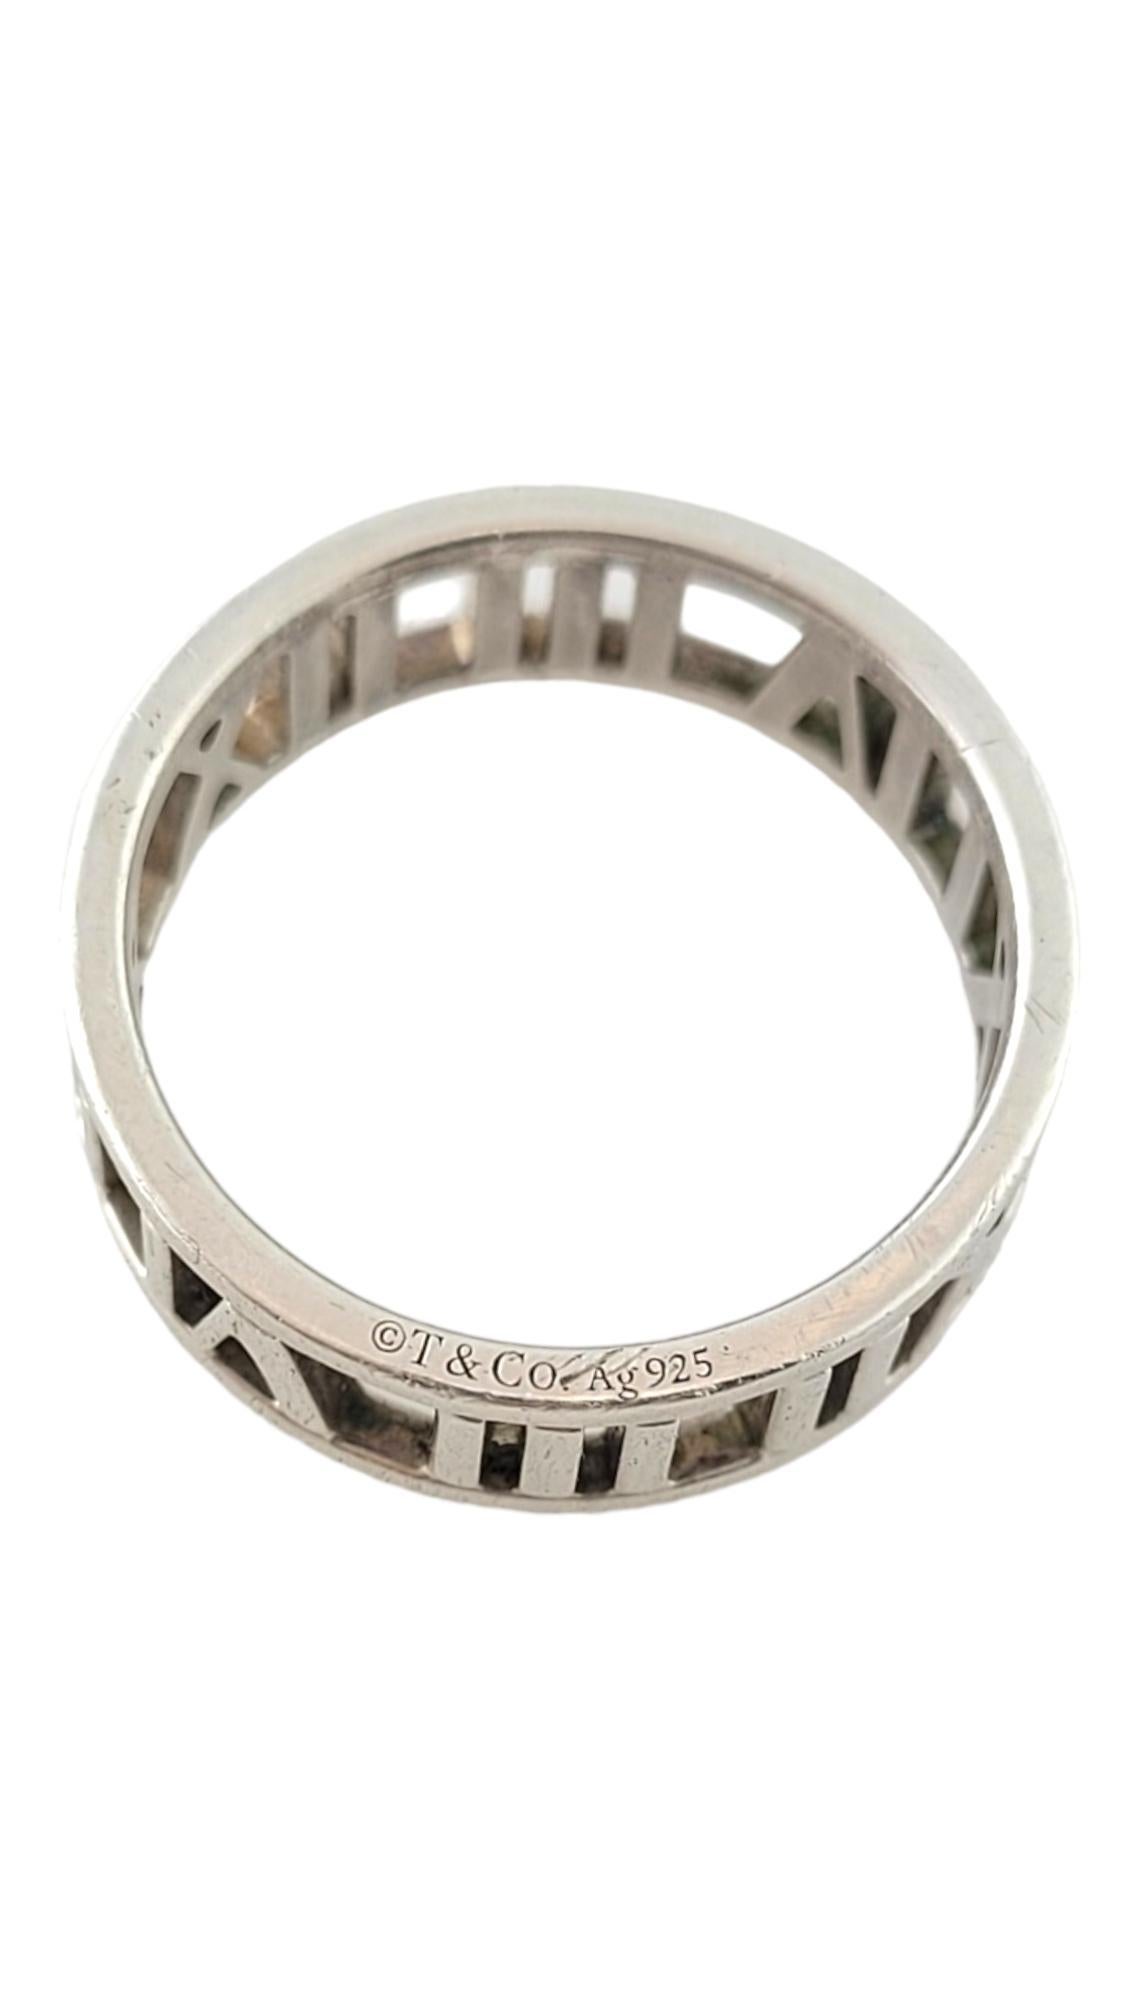 Women's Tiffany & Co Sterling Silver Open Roman Numeral Band Ring Size 7.25-7.5 #17485 For Sale